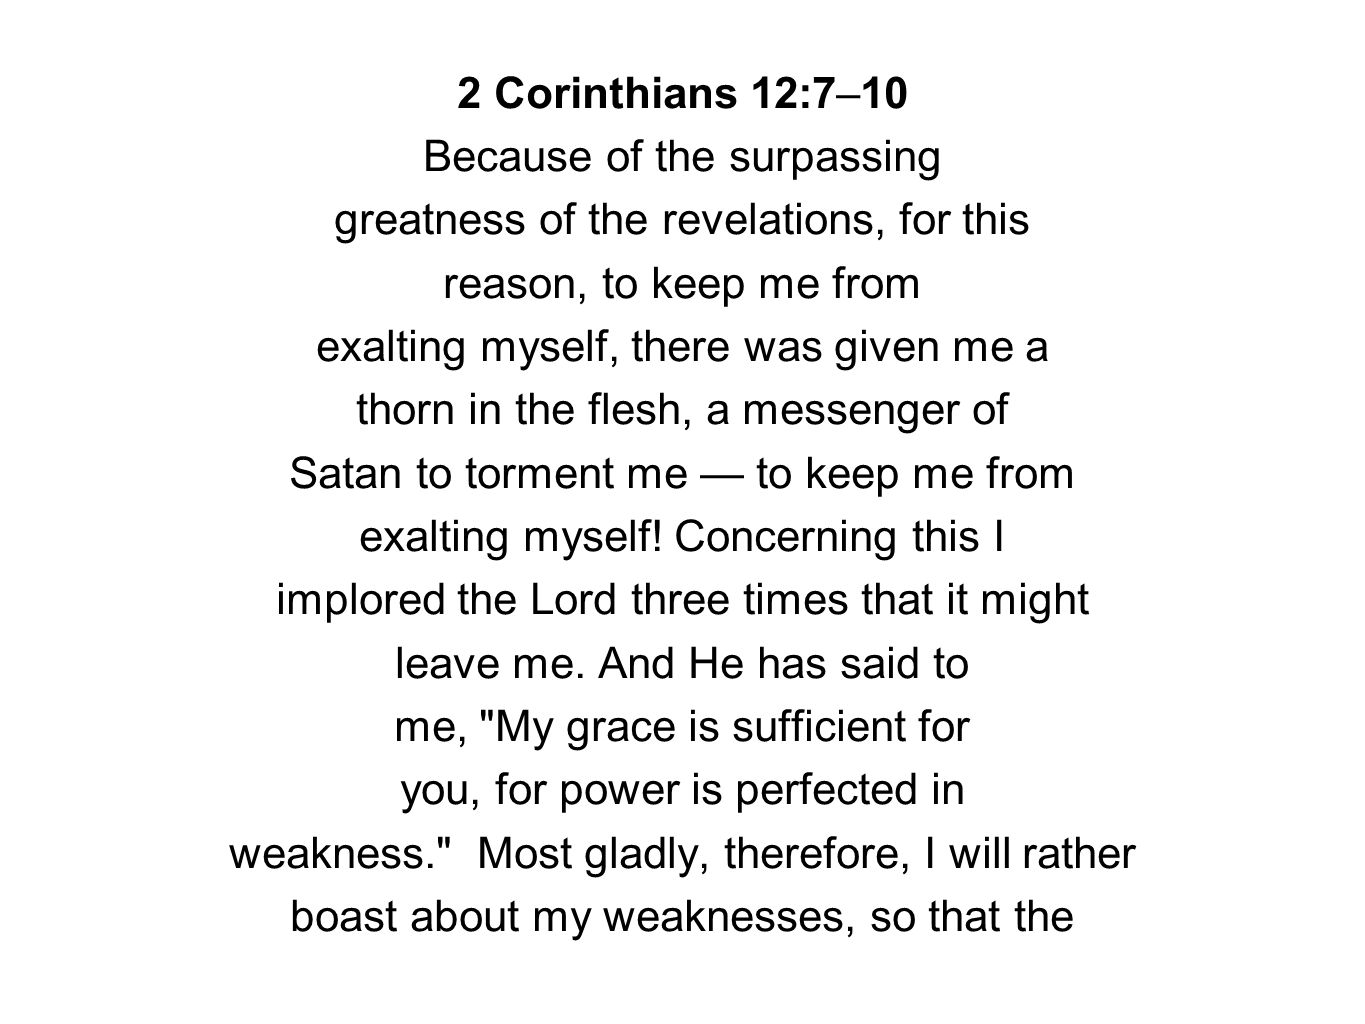 2 Corinthians 12:7–10 Because of the surpassing greatness of the revelations, for this reason, to keep me from exalting myself, there was given me a thorn in the flesh, a messenger of Satan to torment me — to keep me from exalting myself.